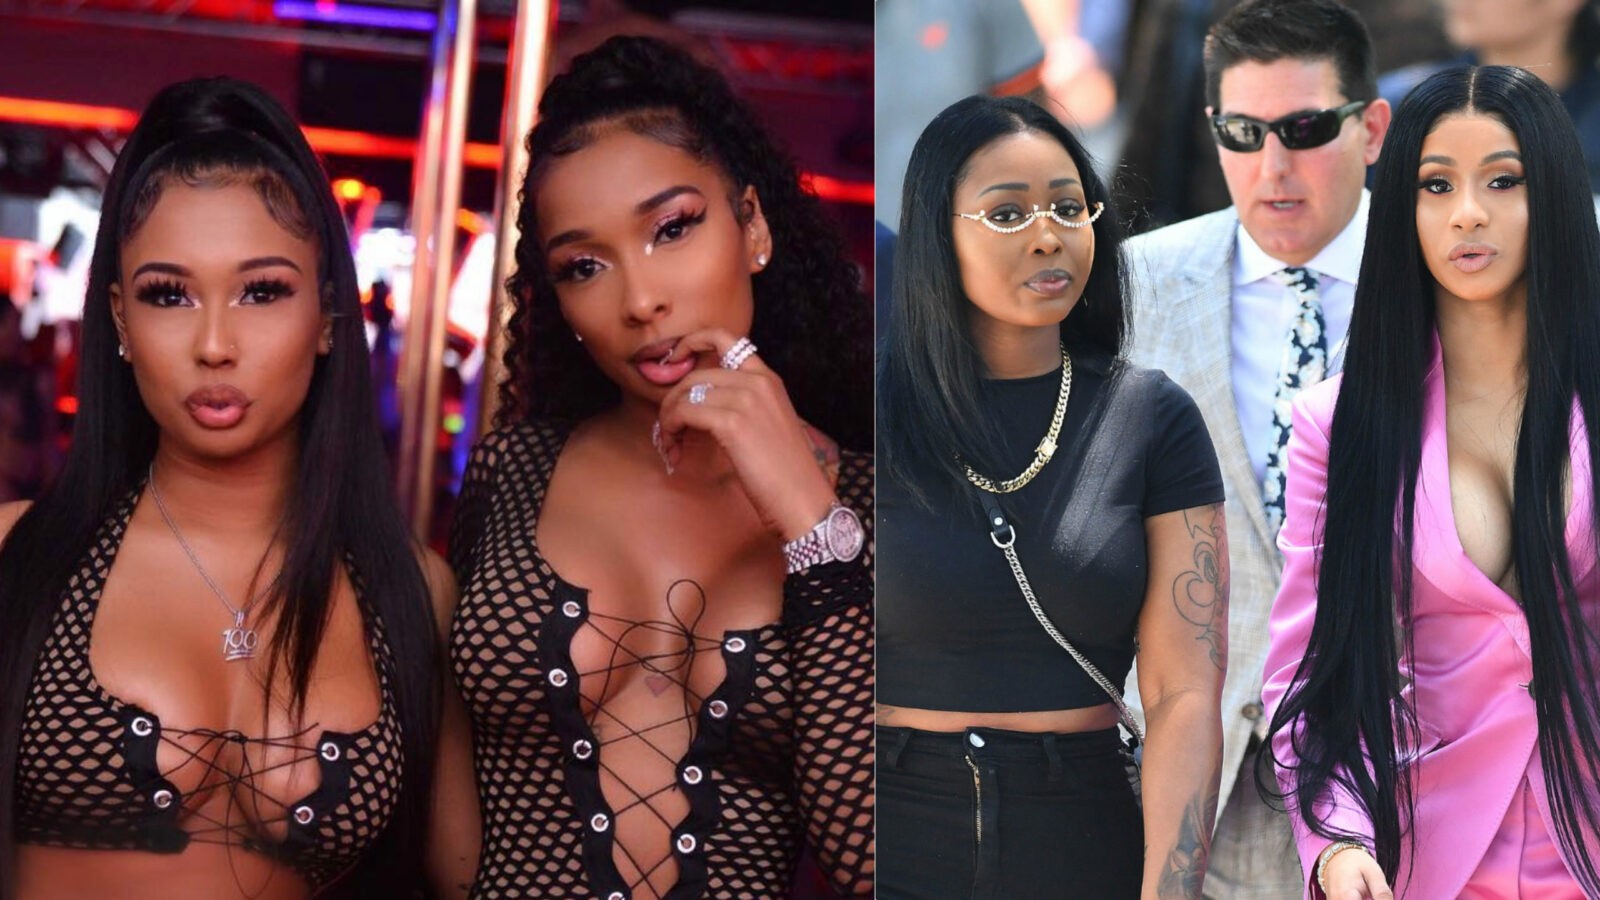 Authorities Say Star Brim Ordered Attack on Sisters in Cardi B Club Brawl.